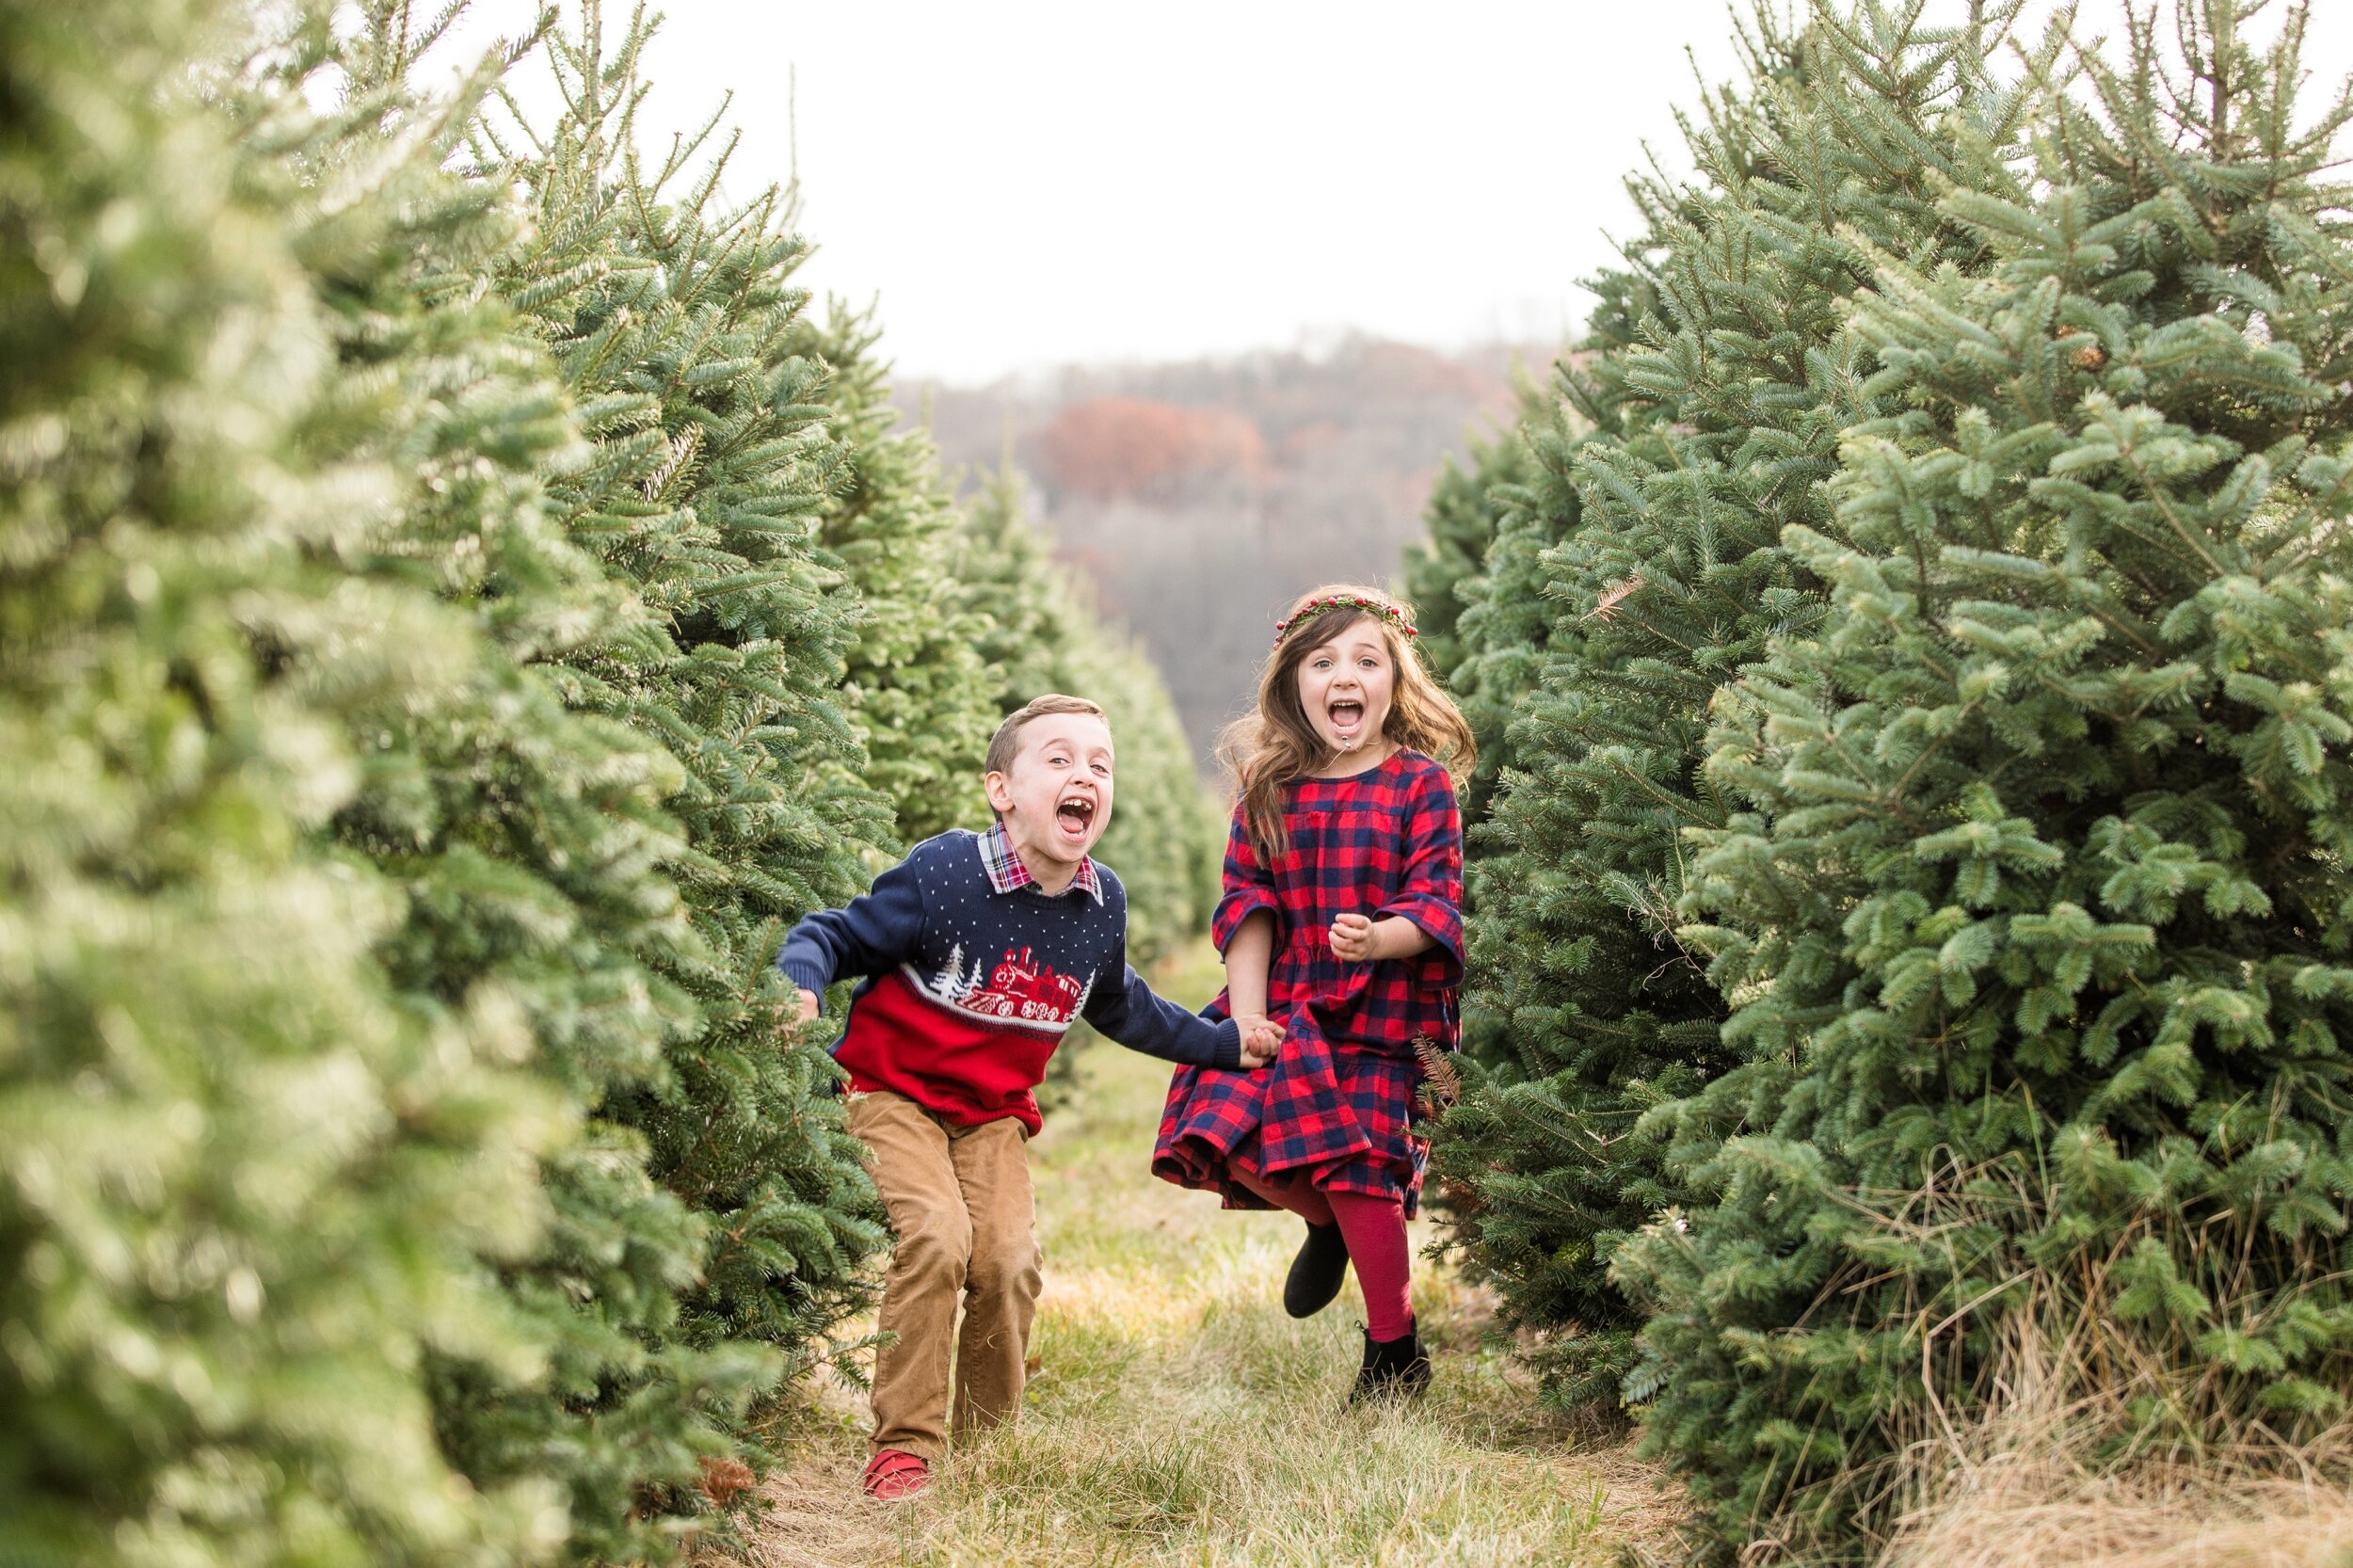 christmas mini sessions pittsburgh, christmas tree farm mini sessions pittsburgh, fall mini sessions pittsburgh, zelienople family photographer, lake forest gardens fombell pa